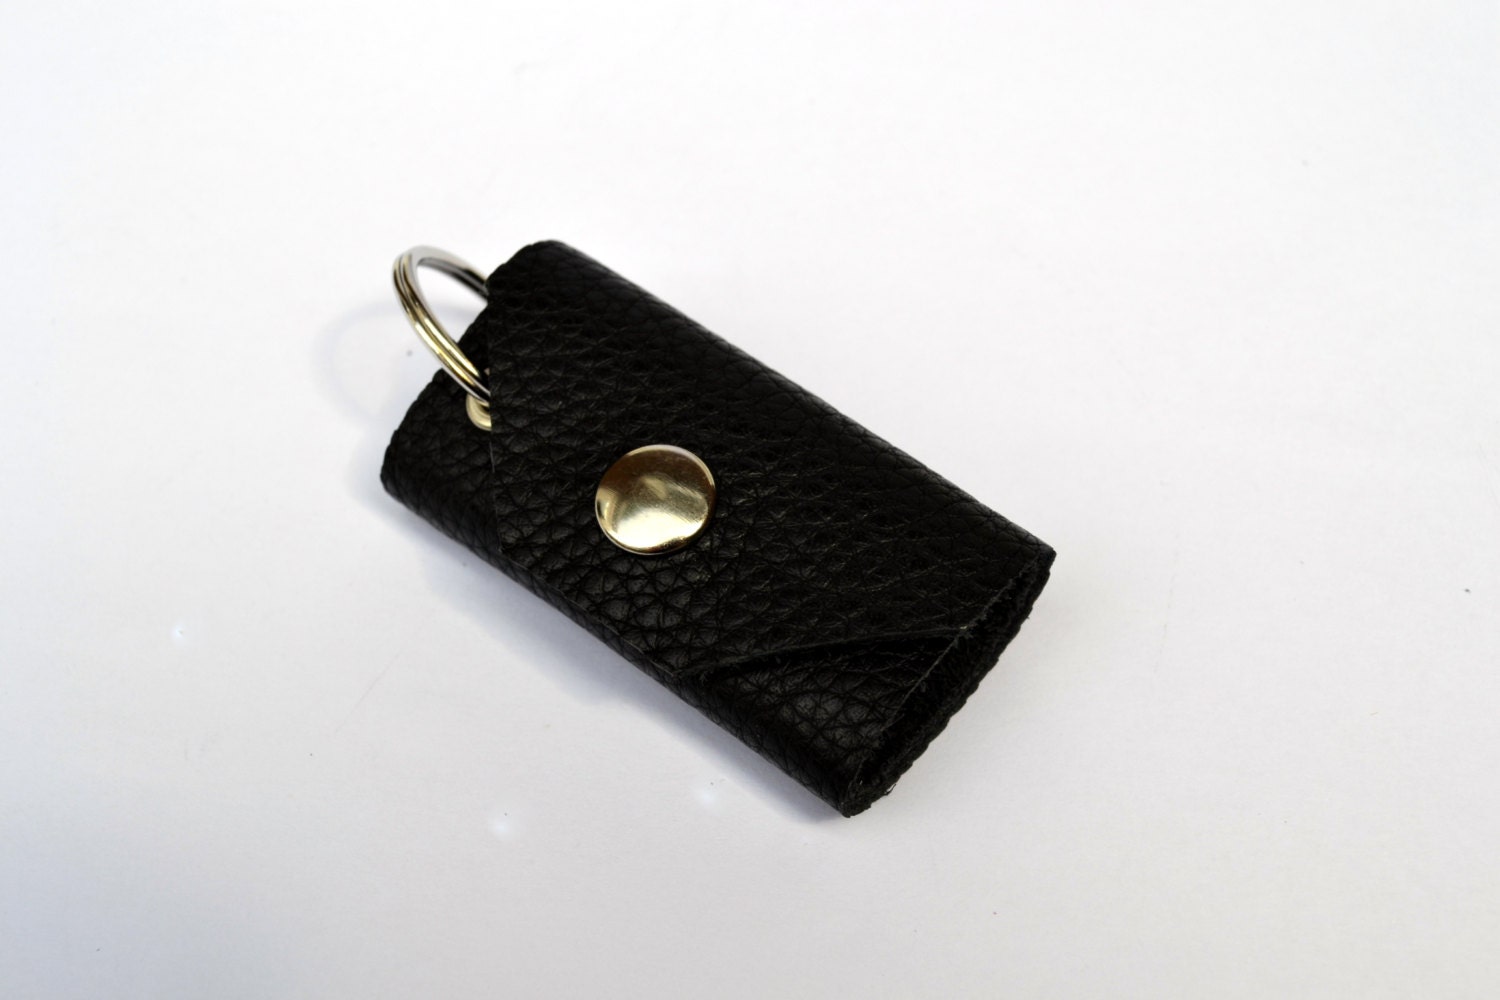 Black Leather Case / Keychain for Loyalty Shopping Cards - Etsy